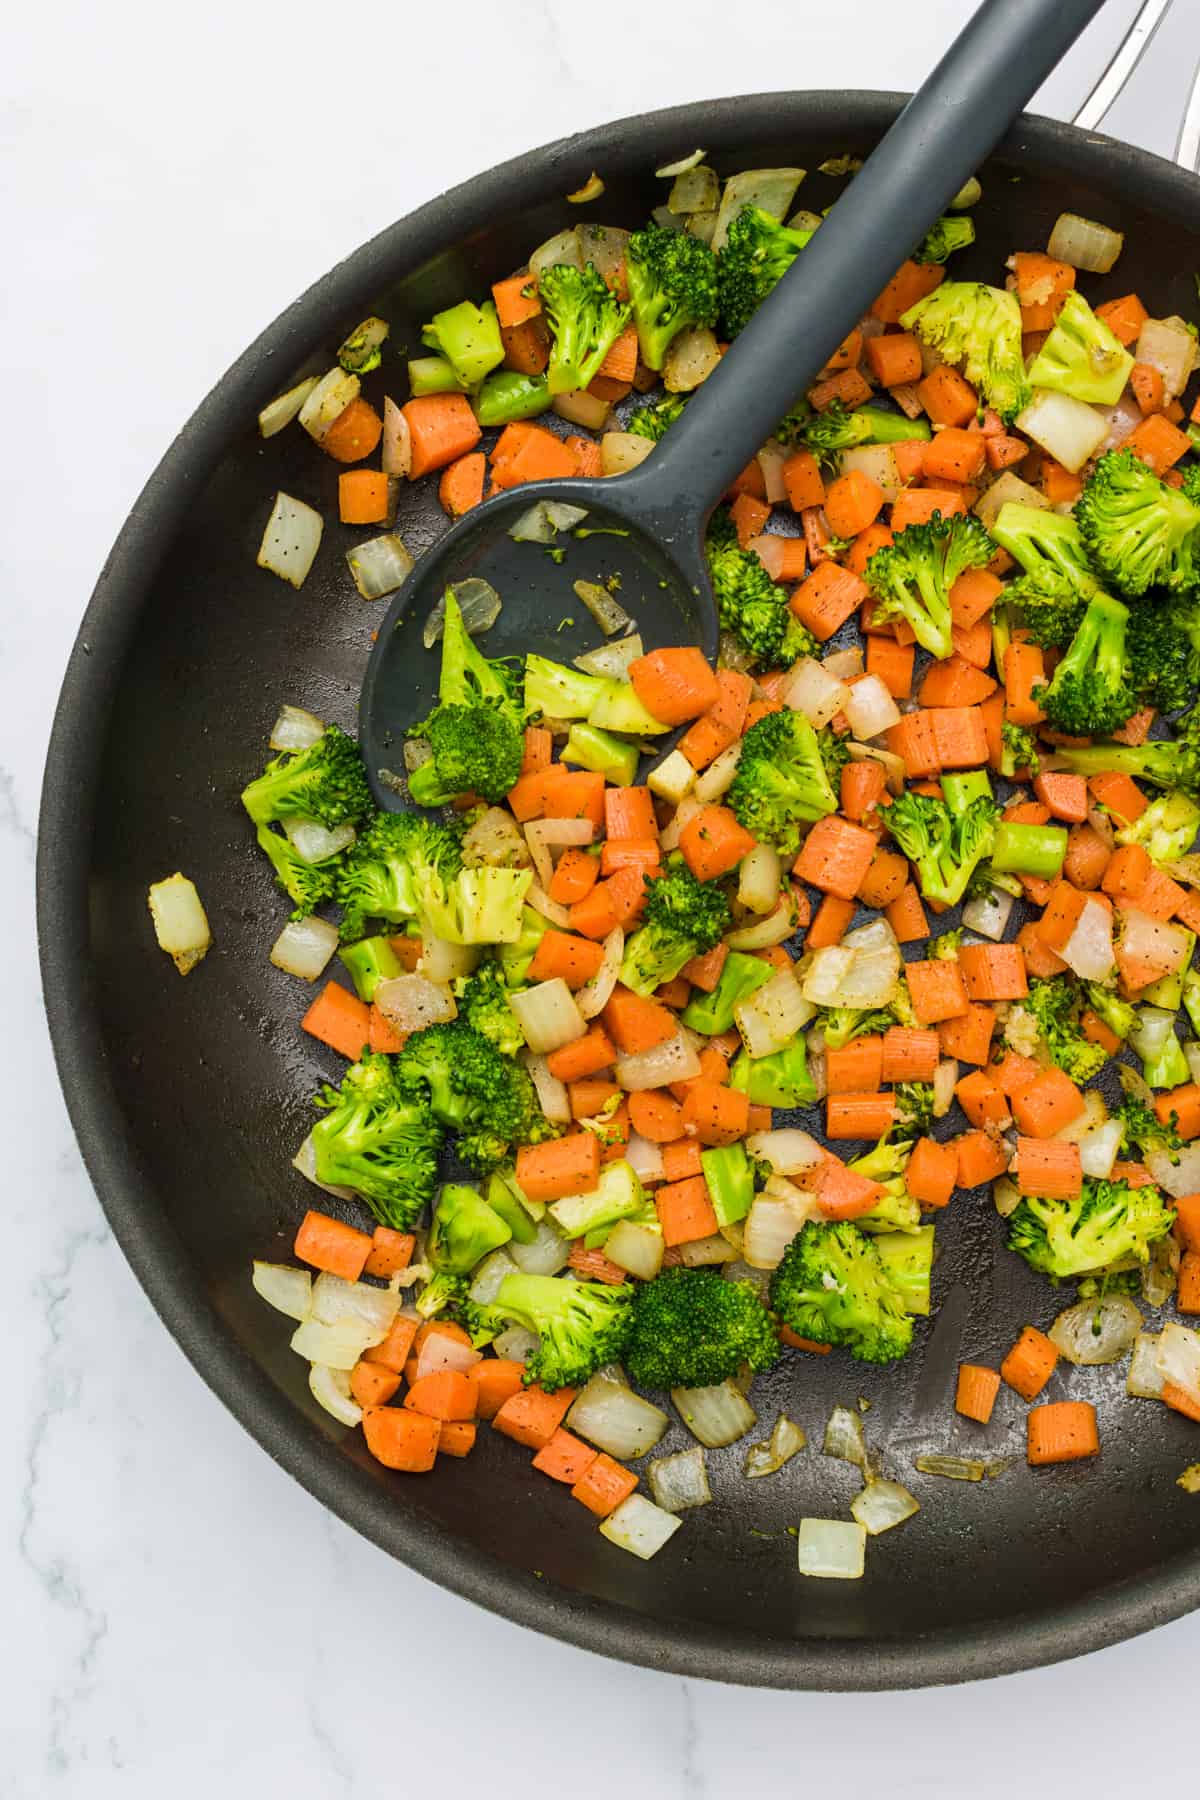 Chopped carrots, onions, and broccoli being sautéed in a pan.